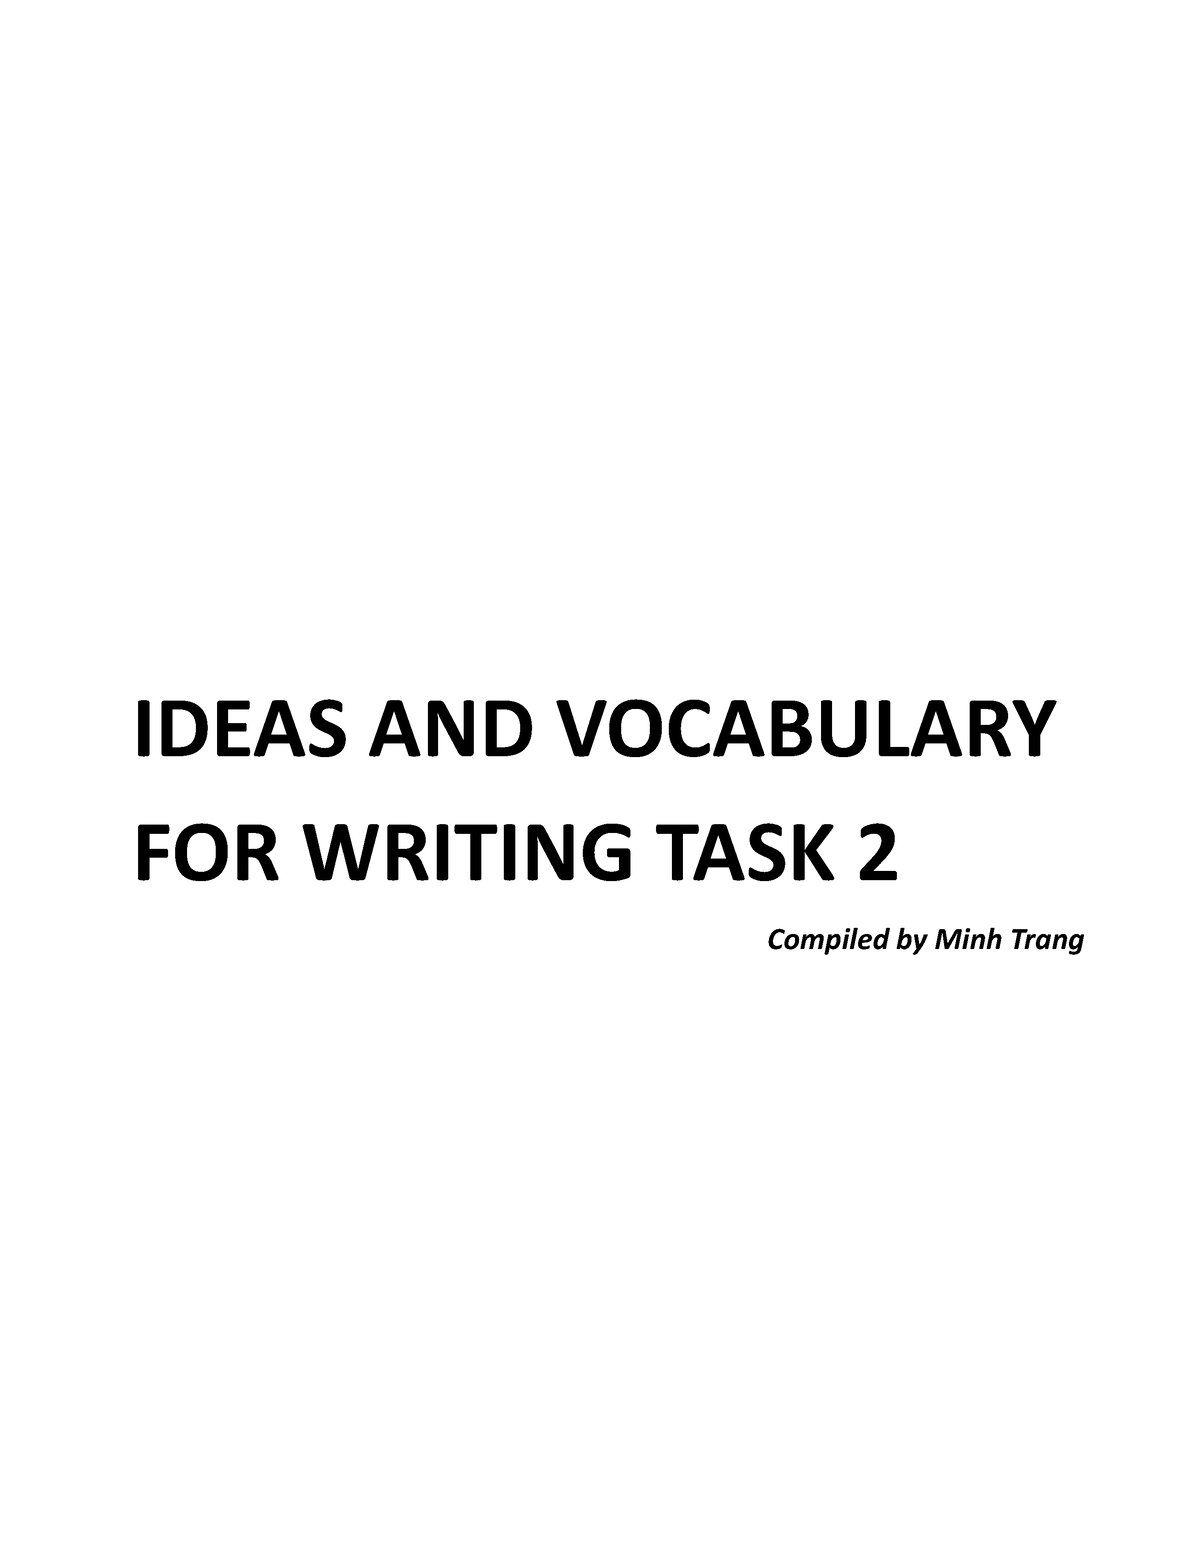 vocabulary for writing task 2 on education